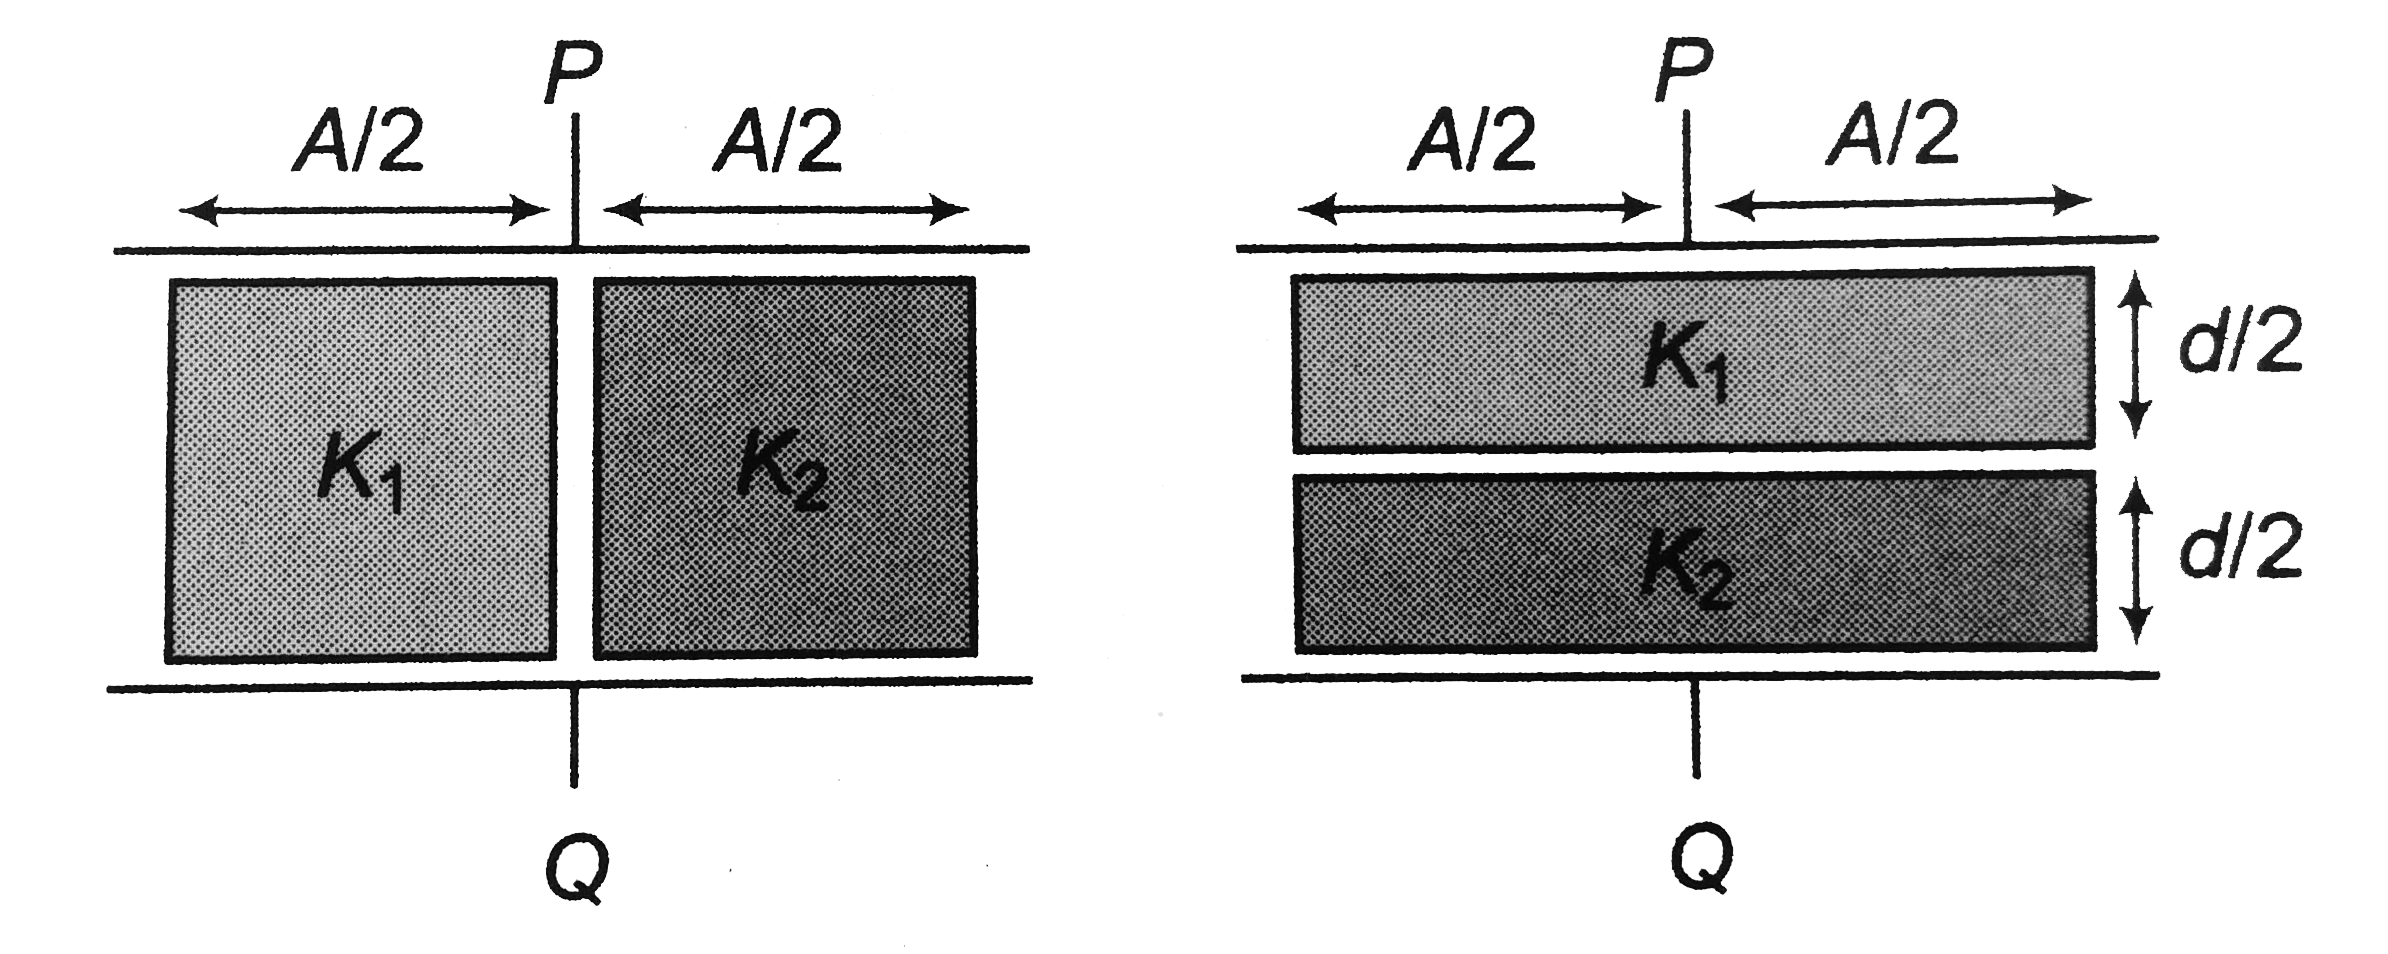 In the arrangement shown in figure dielectric constant K1=2 and K2=3. If the capacitance across P and Q are C1 and C2 respectively, then C1//C2 wil be (the gaps shown are negligible)